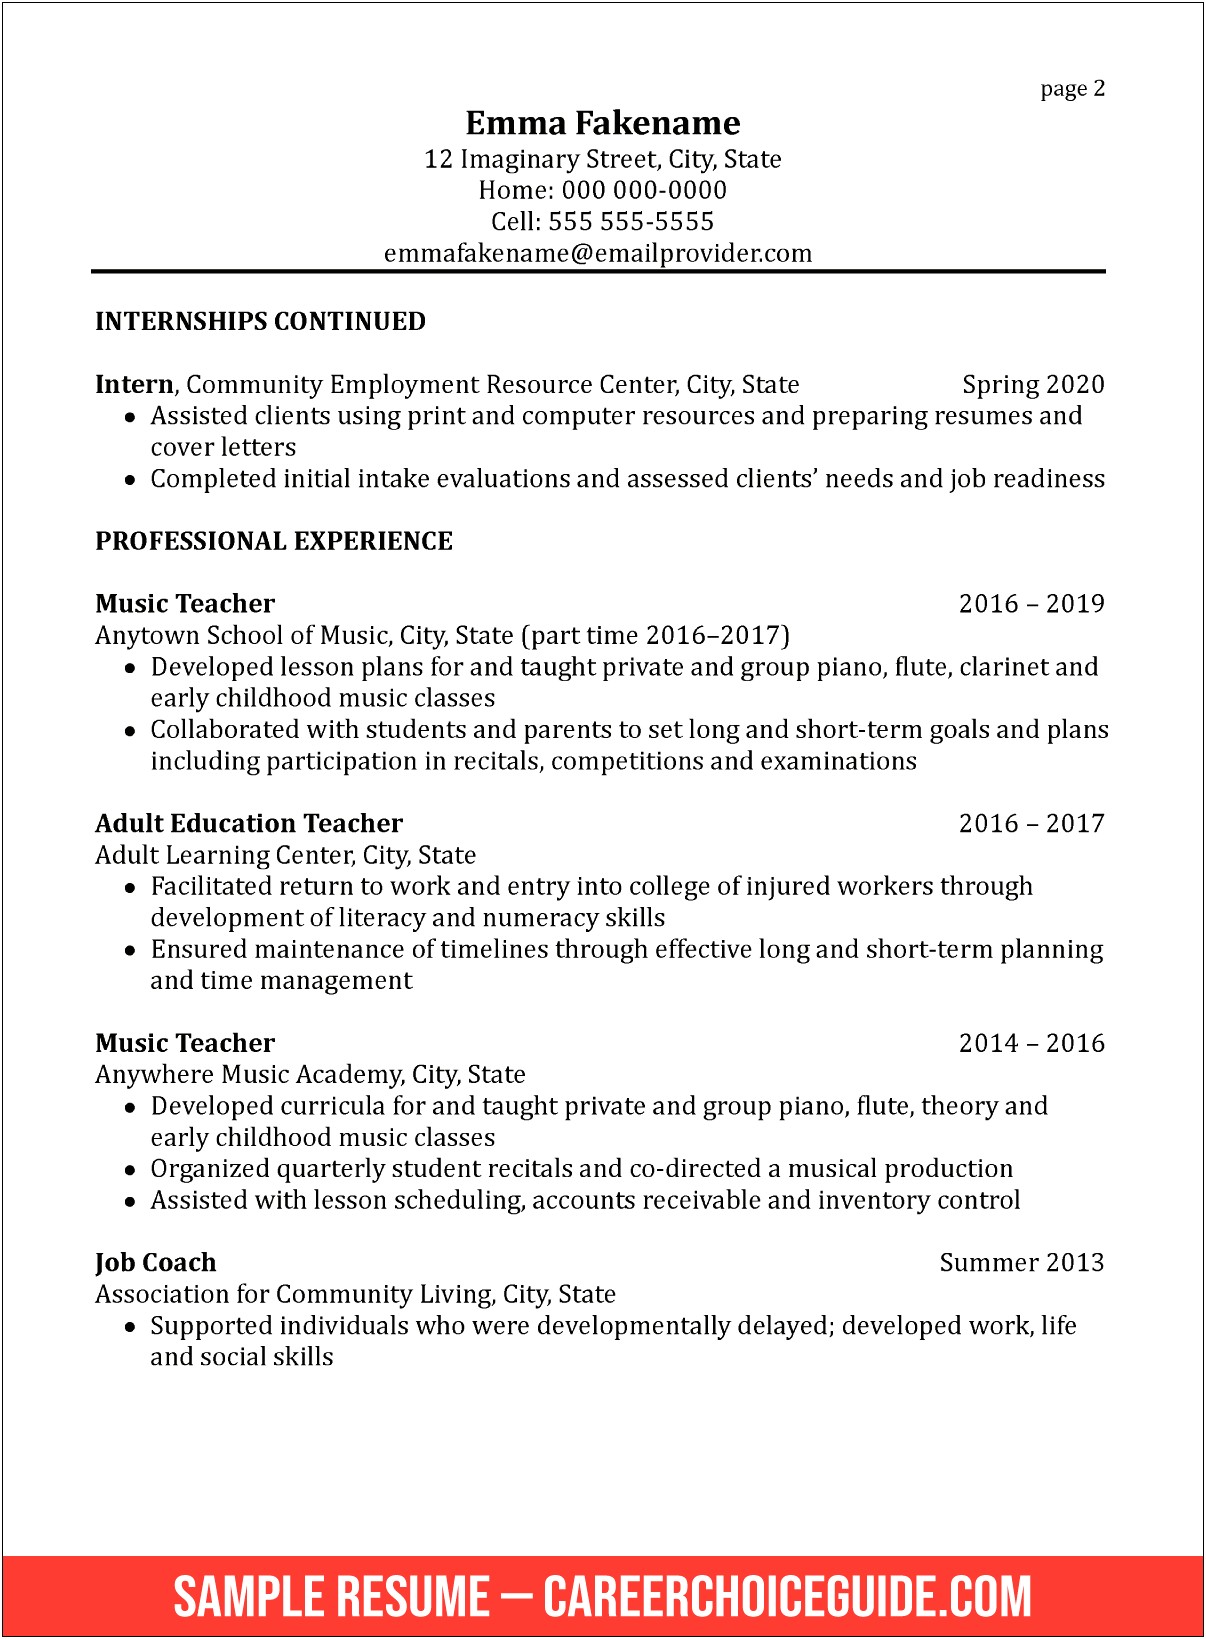 Resume For Career Change With Experience